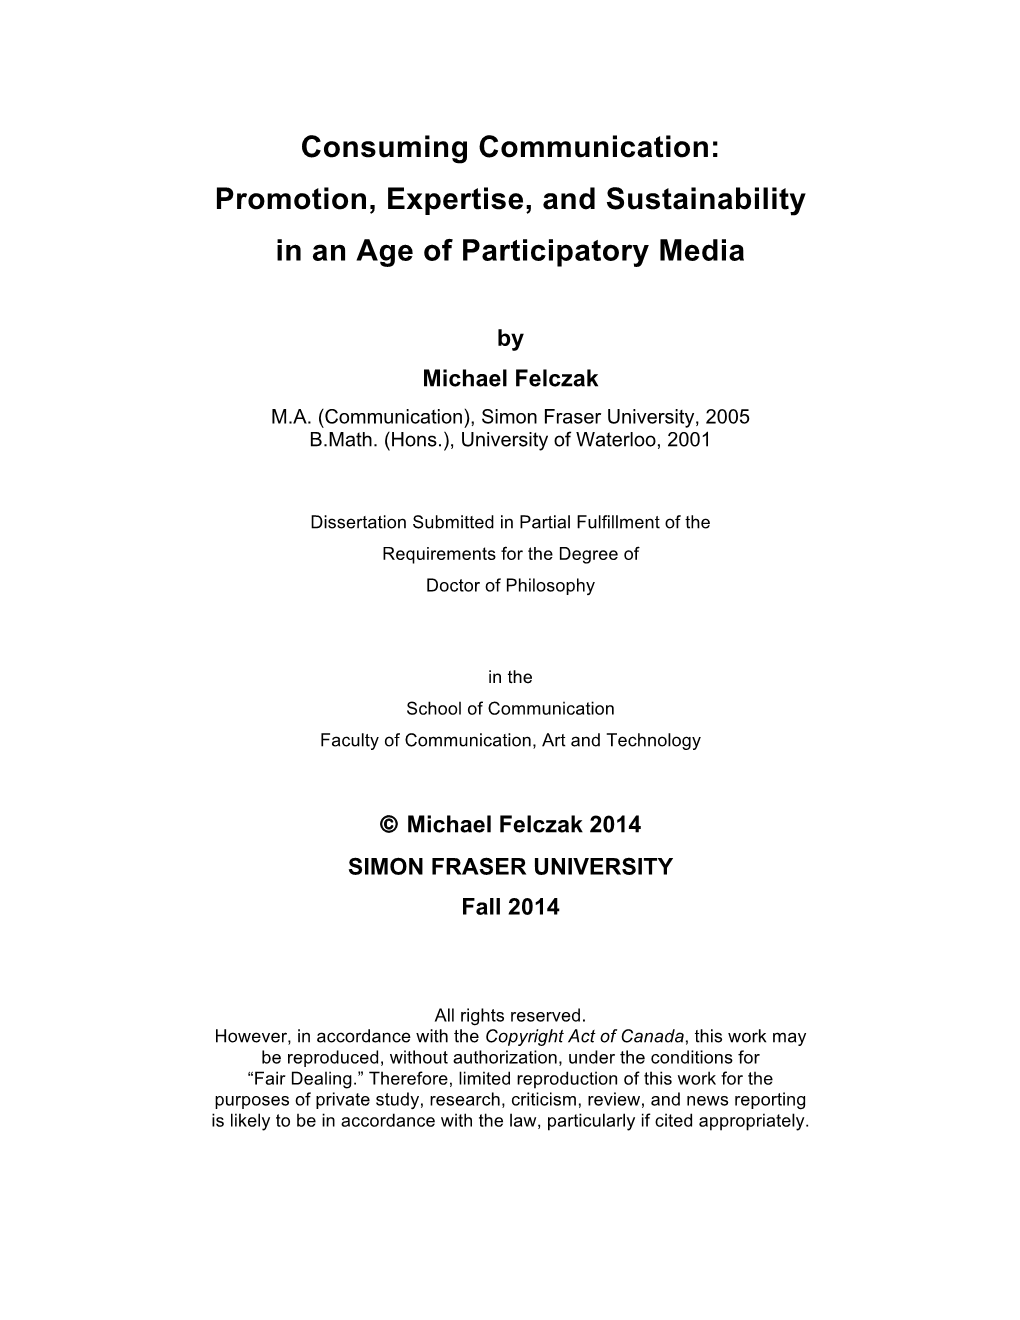 Promotion, Expertise, and Sustainability in an Age of Participatory Media